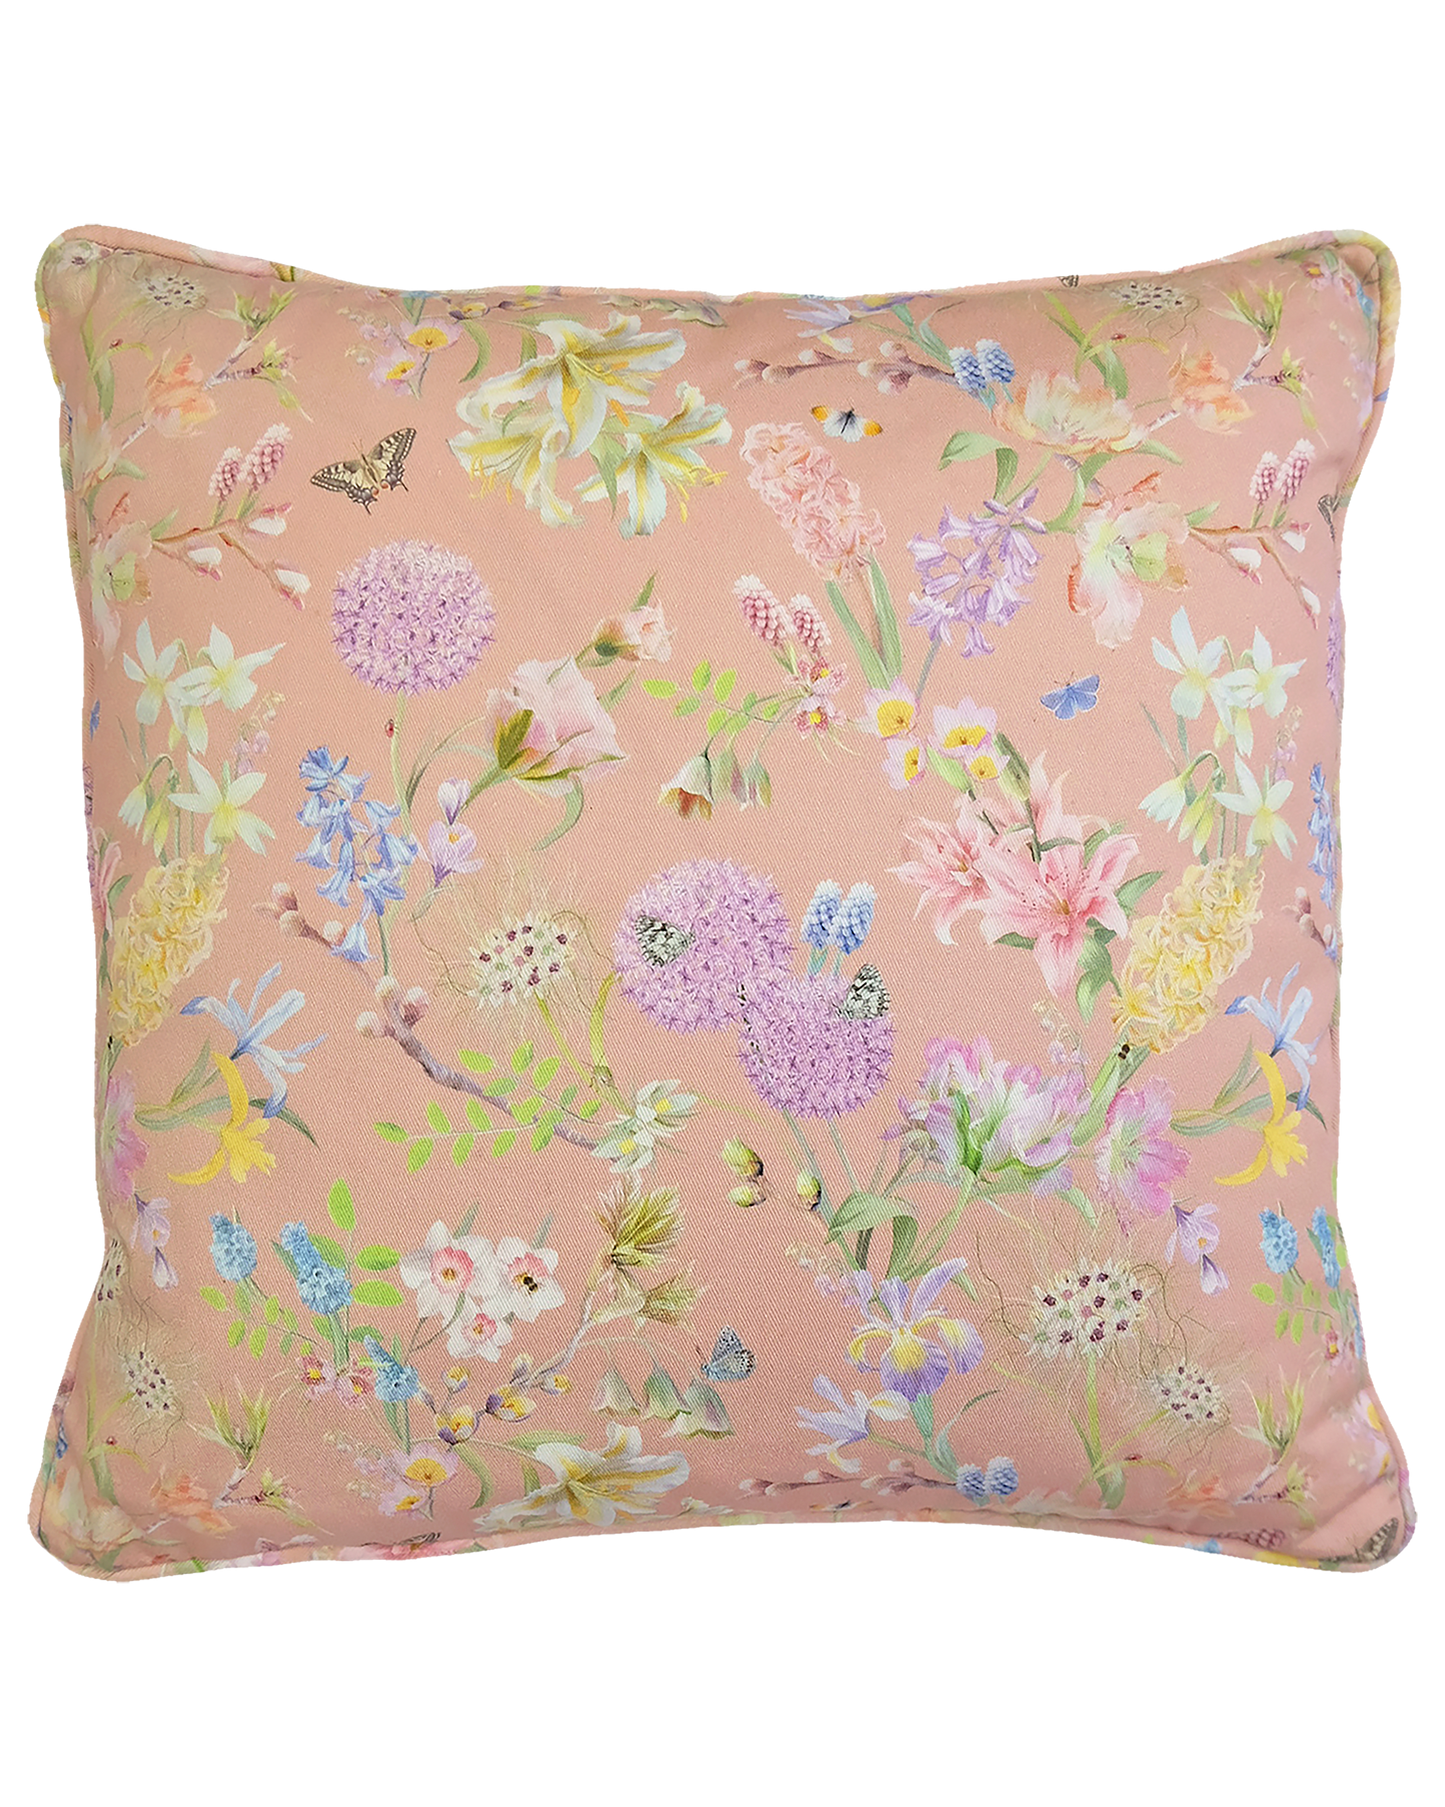 Pastel peach eco friendly nature inspired pattern stylish scatter cushions for colourful traditional interior design.